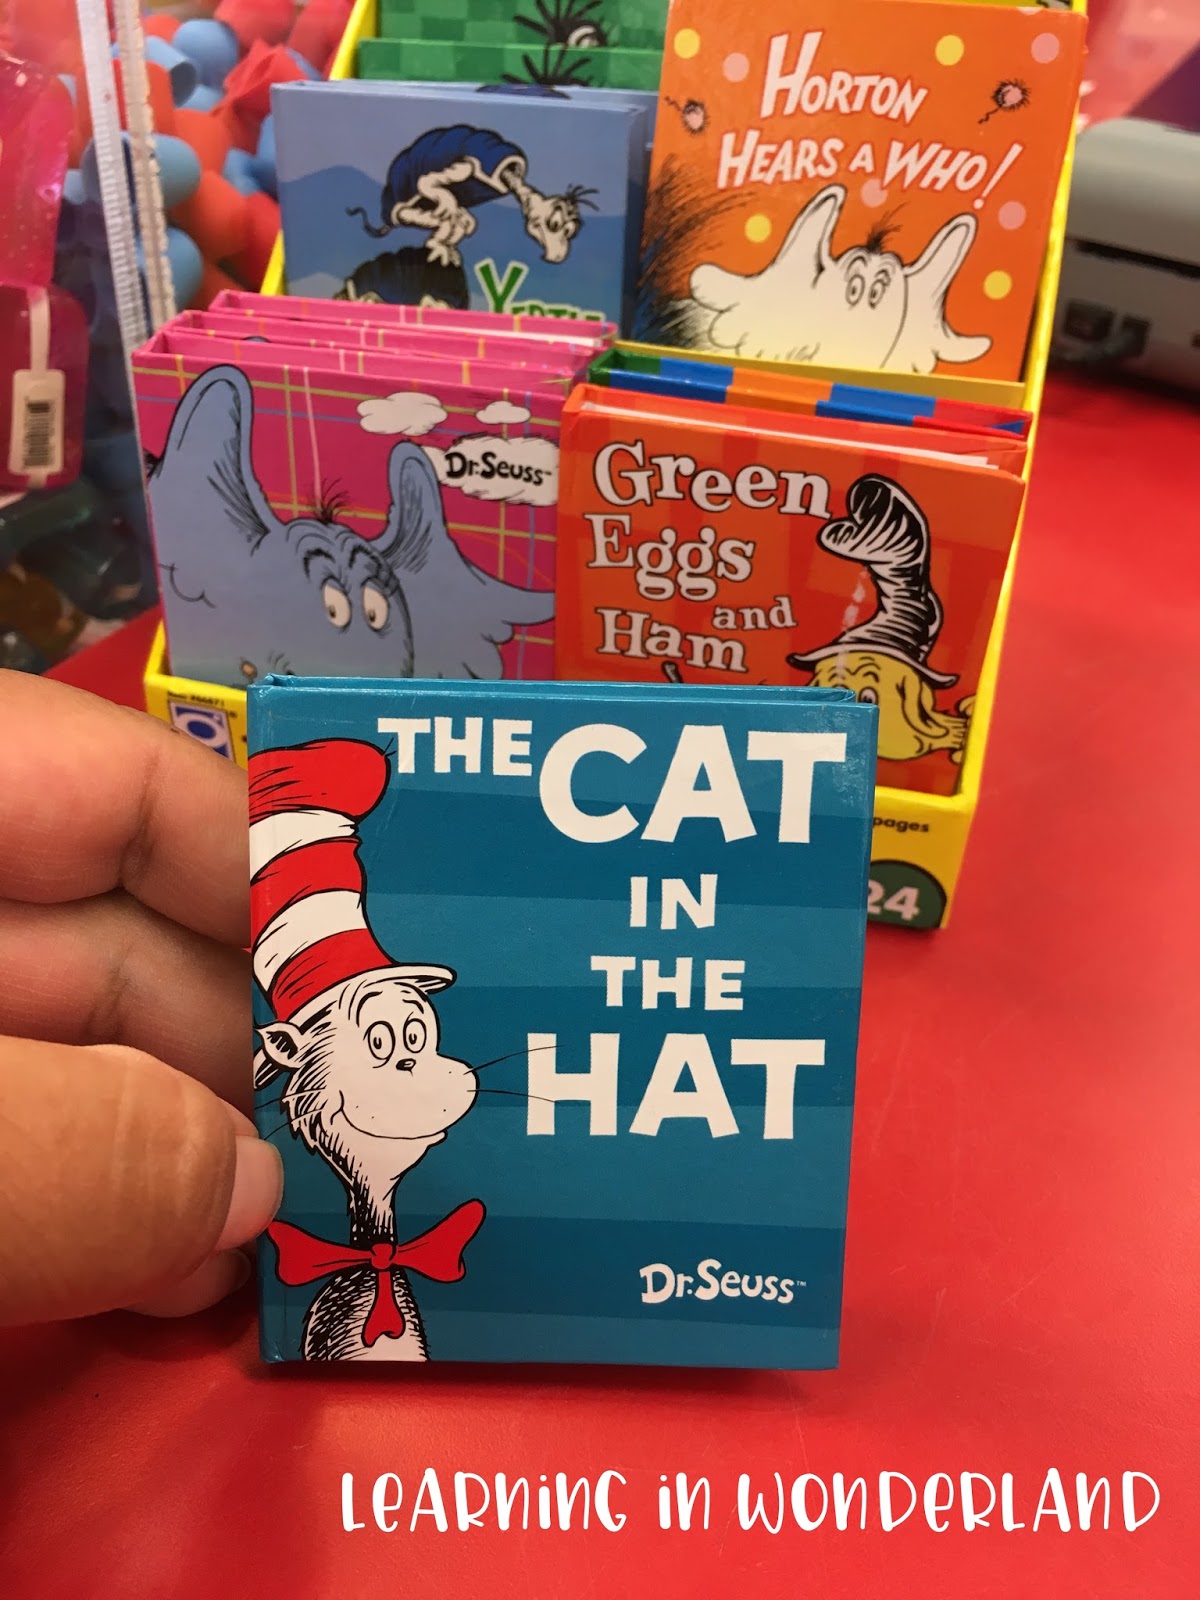 These little notebooks are perfect for Read Across America!